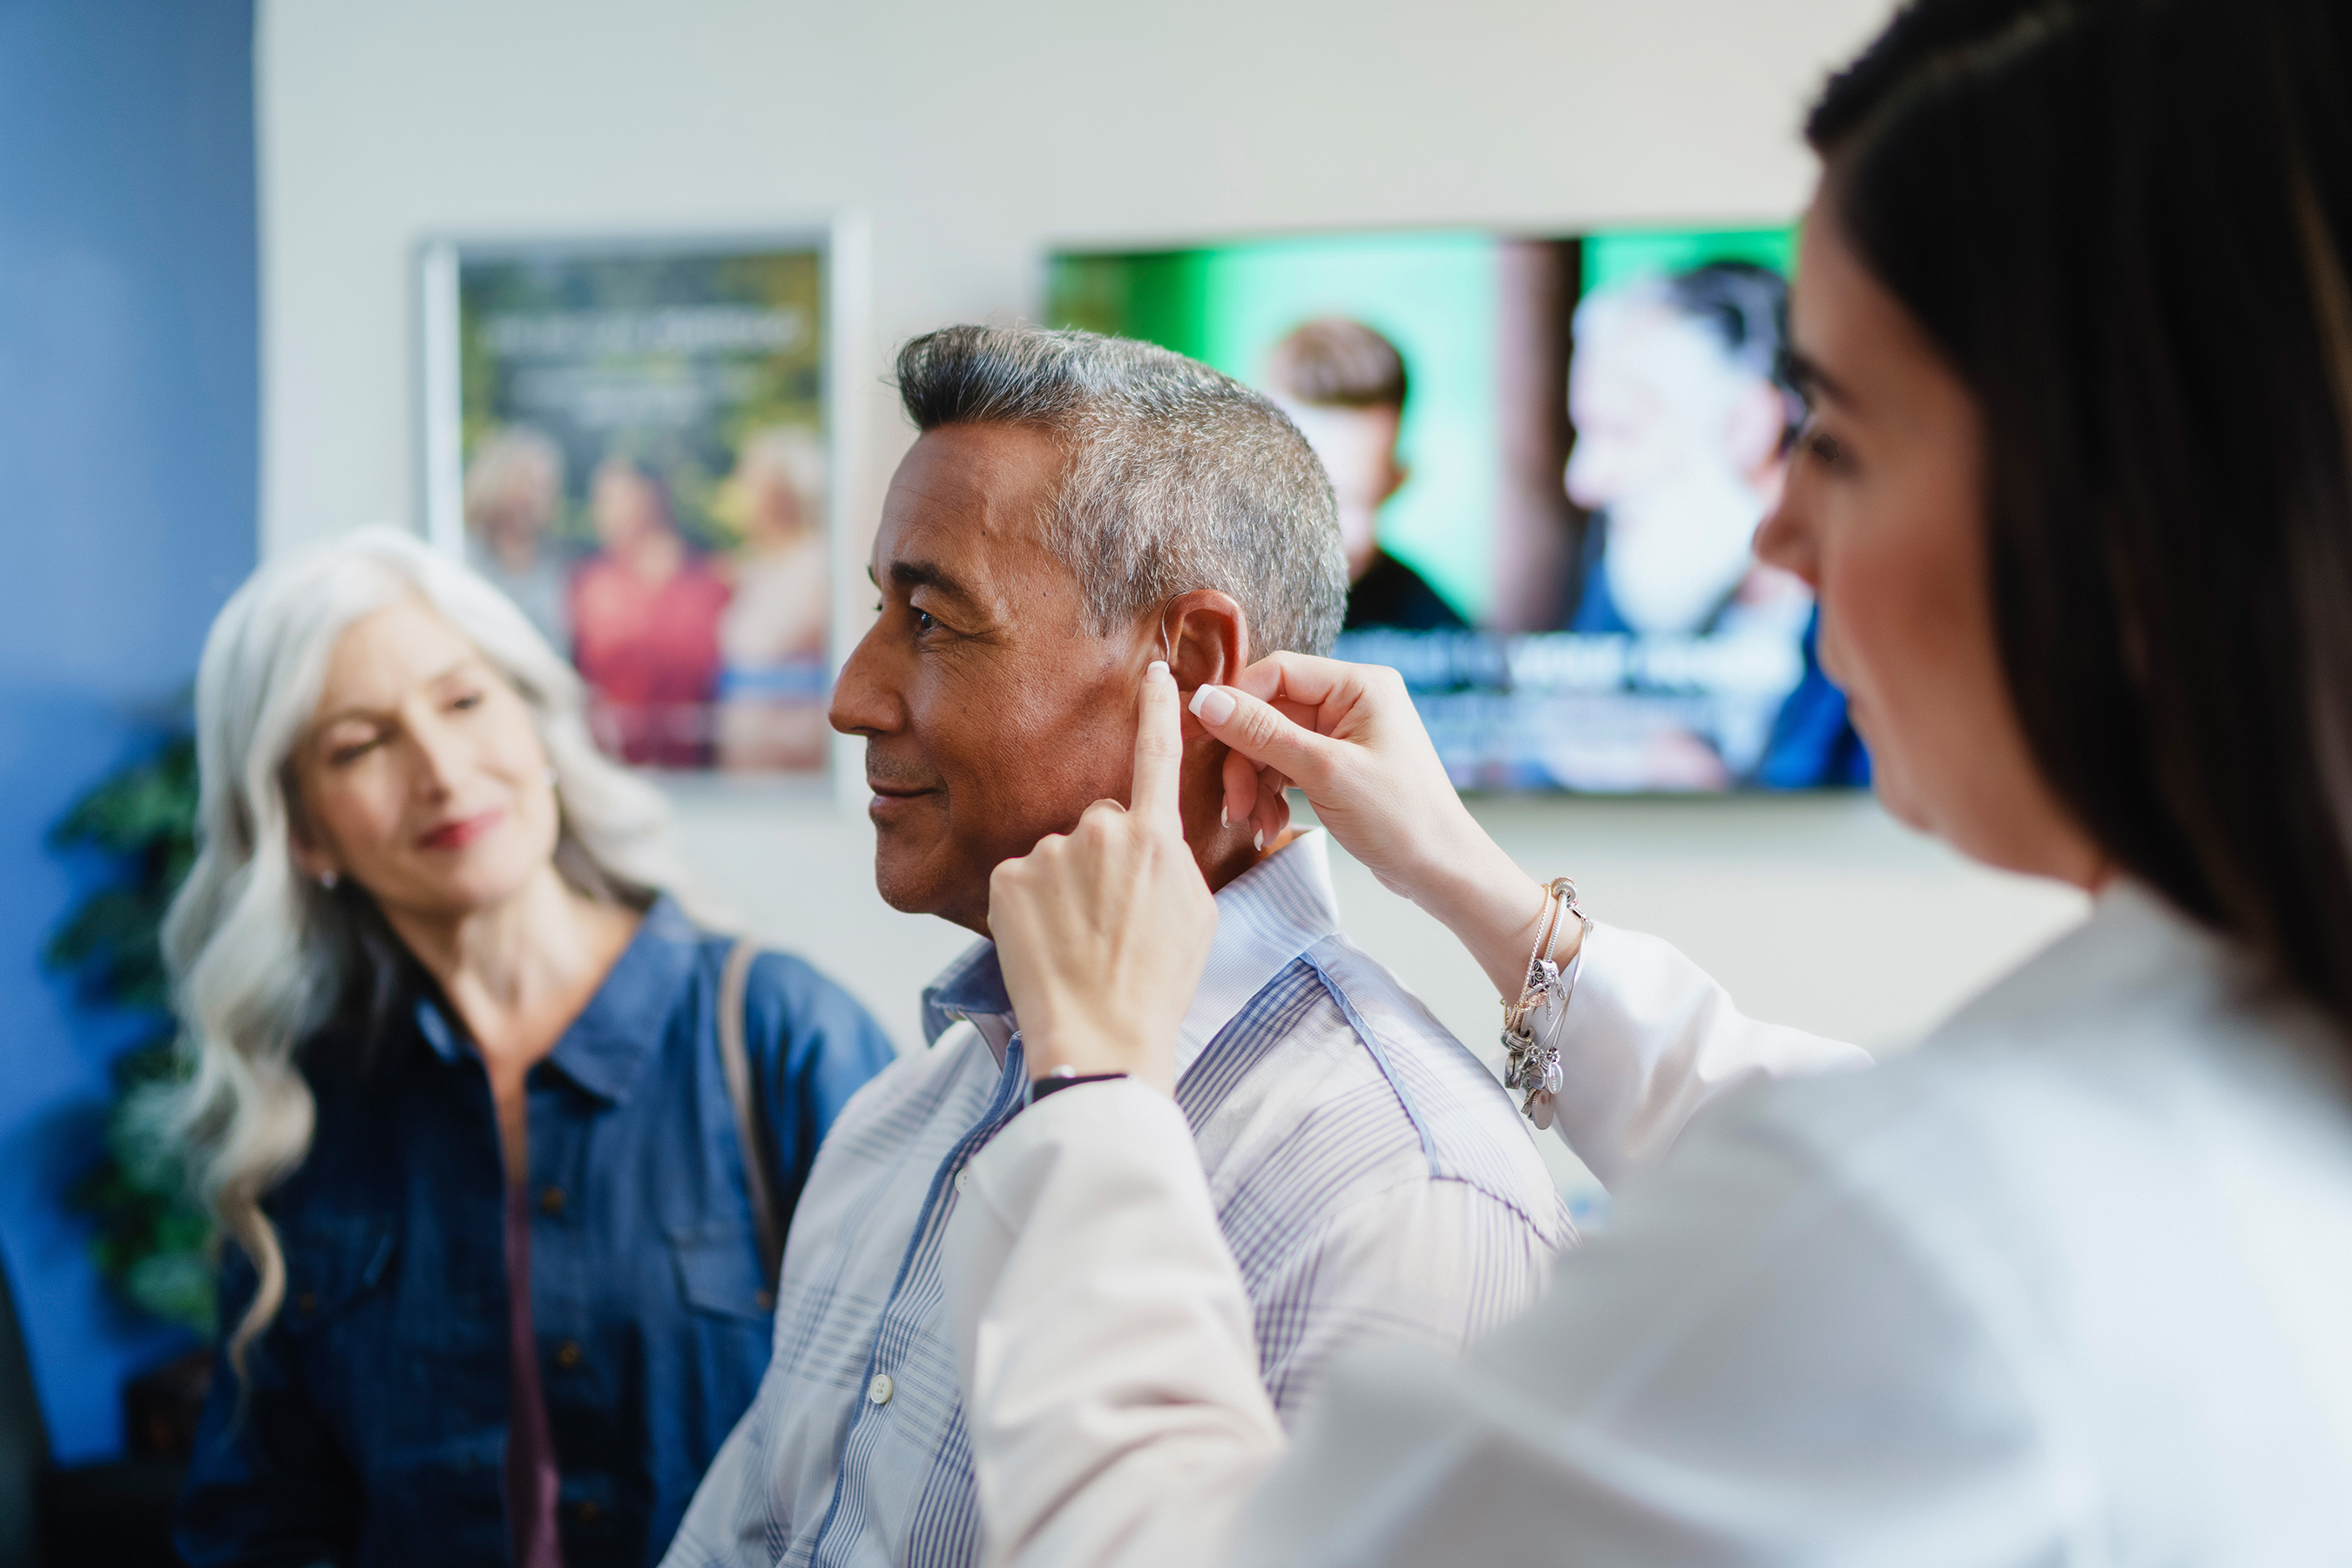 Patient being fitted with Beltone hearing aid